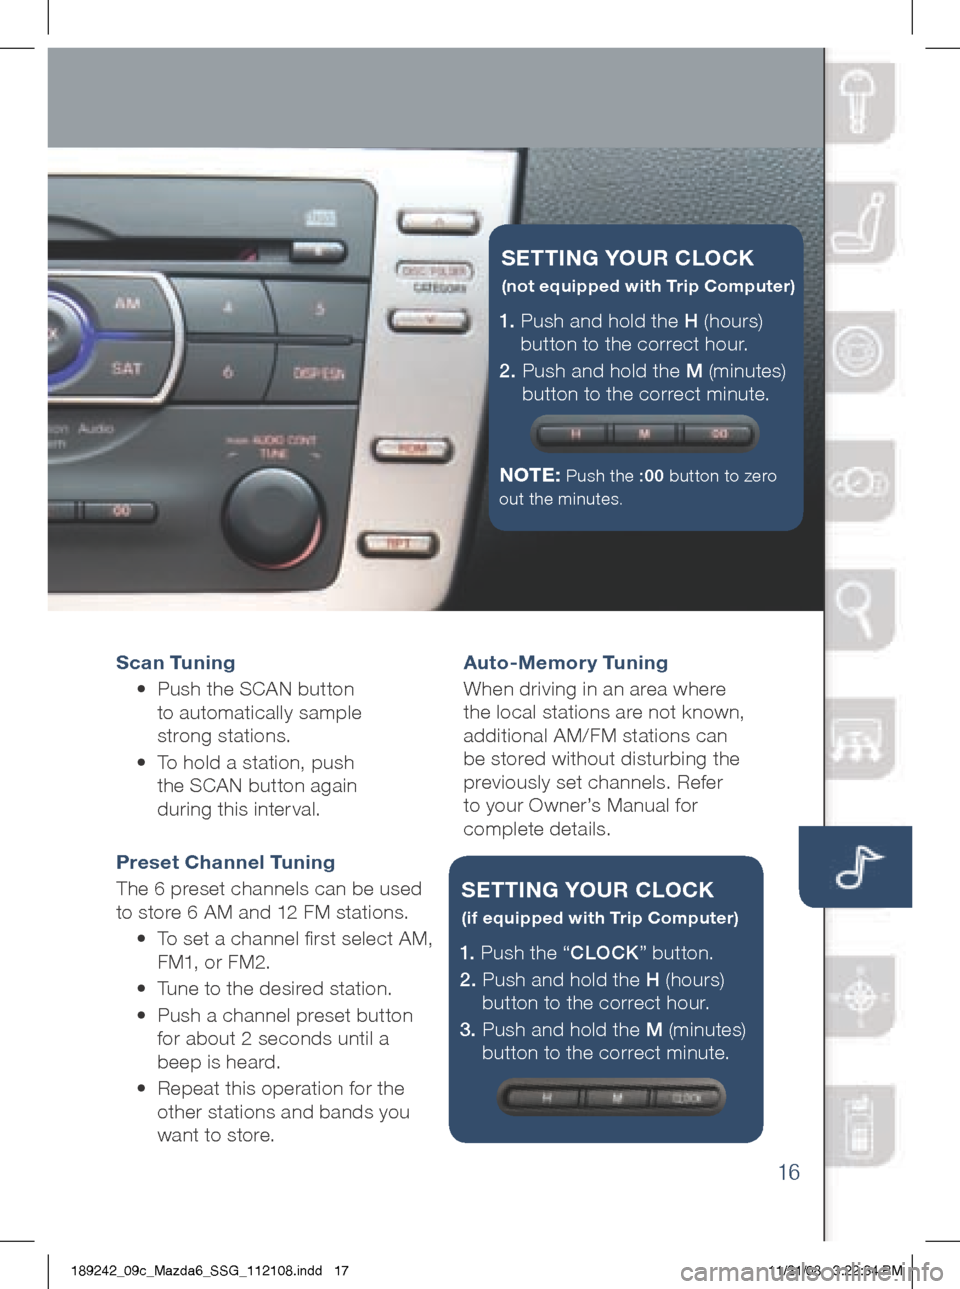 MAZDA MODEL 6 2009  Smart Start Guide (in English) 16
Scan Tu ning 
	 •	 	
Push	the	SCAN 	button	  
to 	automatically 	sample 	 
strong 	stations. 	
	 •	 	
To	hold 	a 	station, 	push	  
the	SCAN 	button	again 	 
during 	this 	inter val.	
Preset Ch